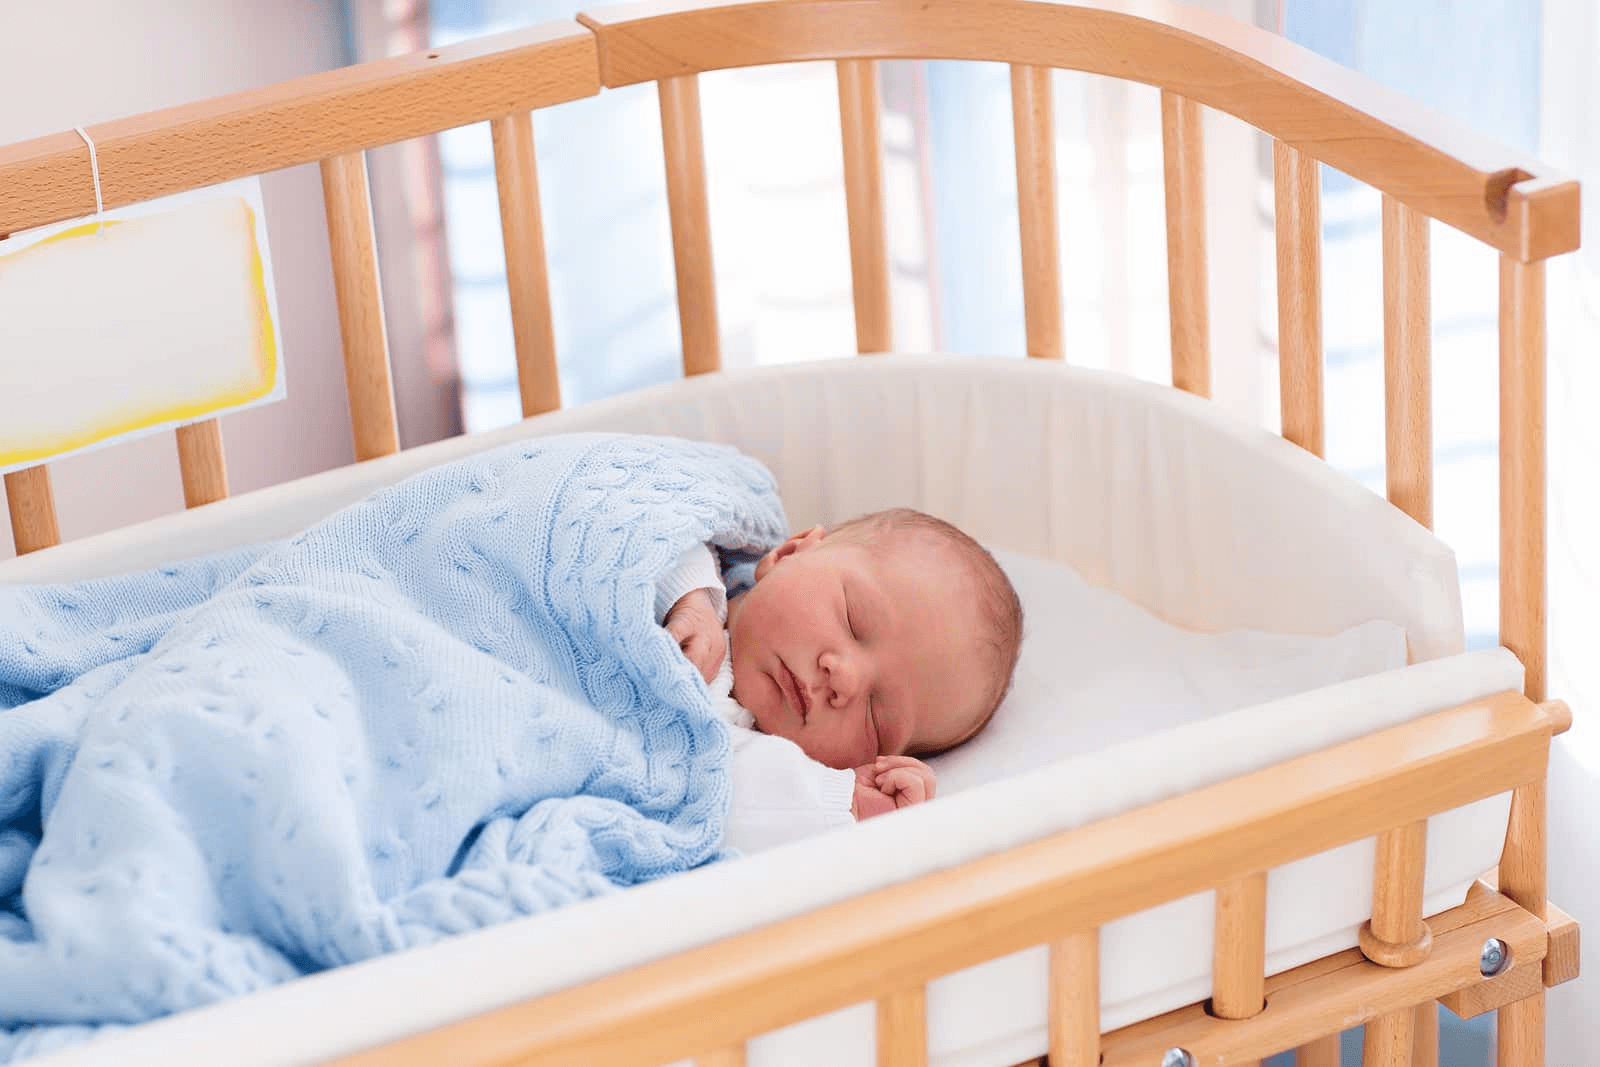 Your Baby Needs To Fall Back Asleep On Its Own